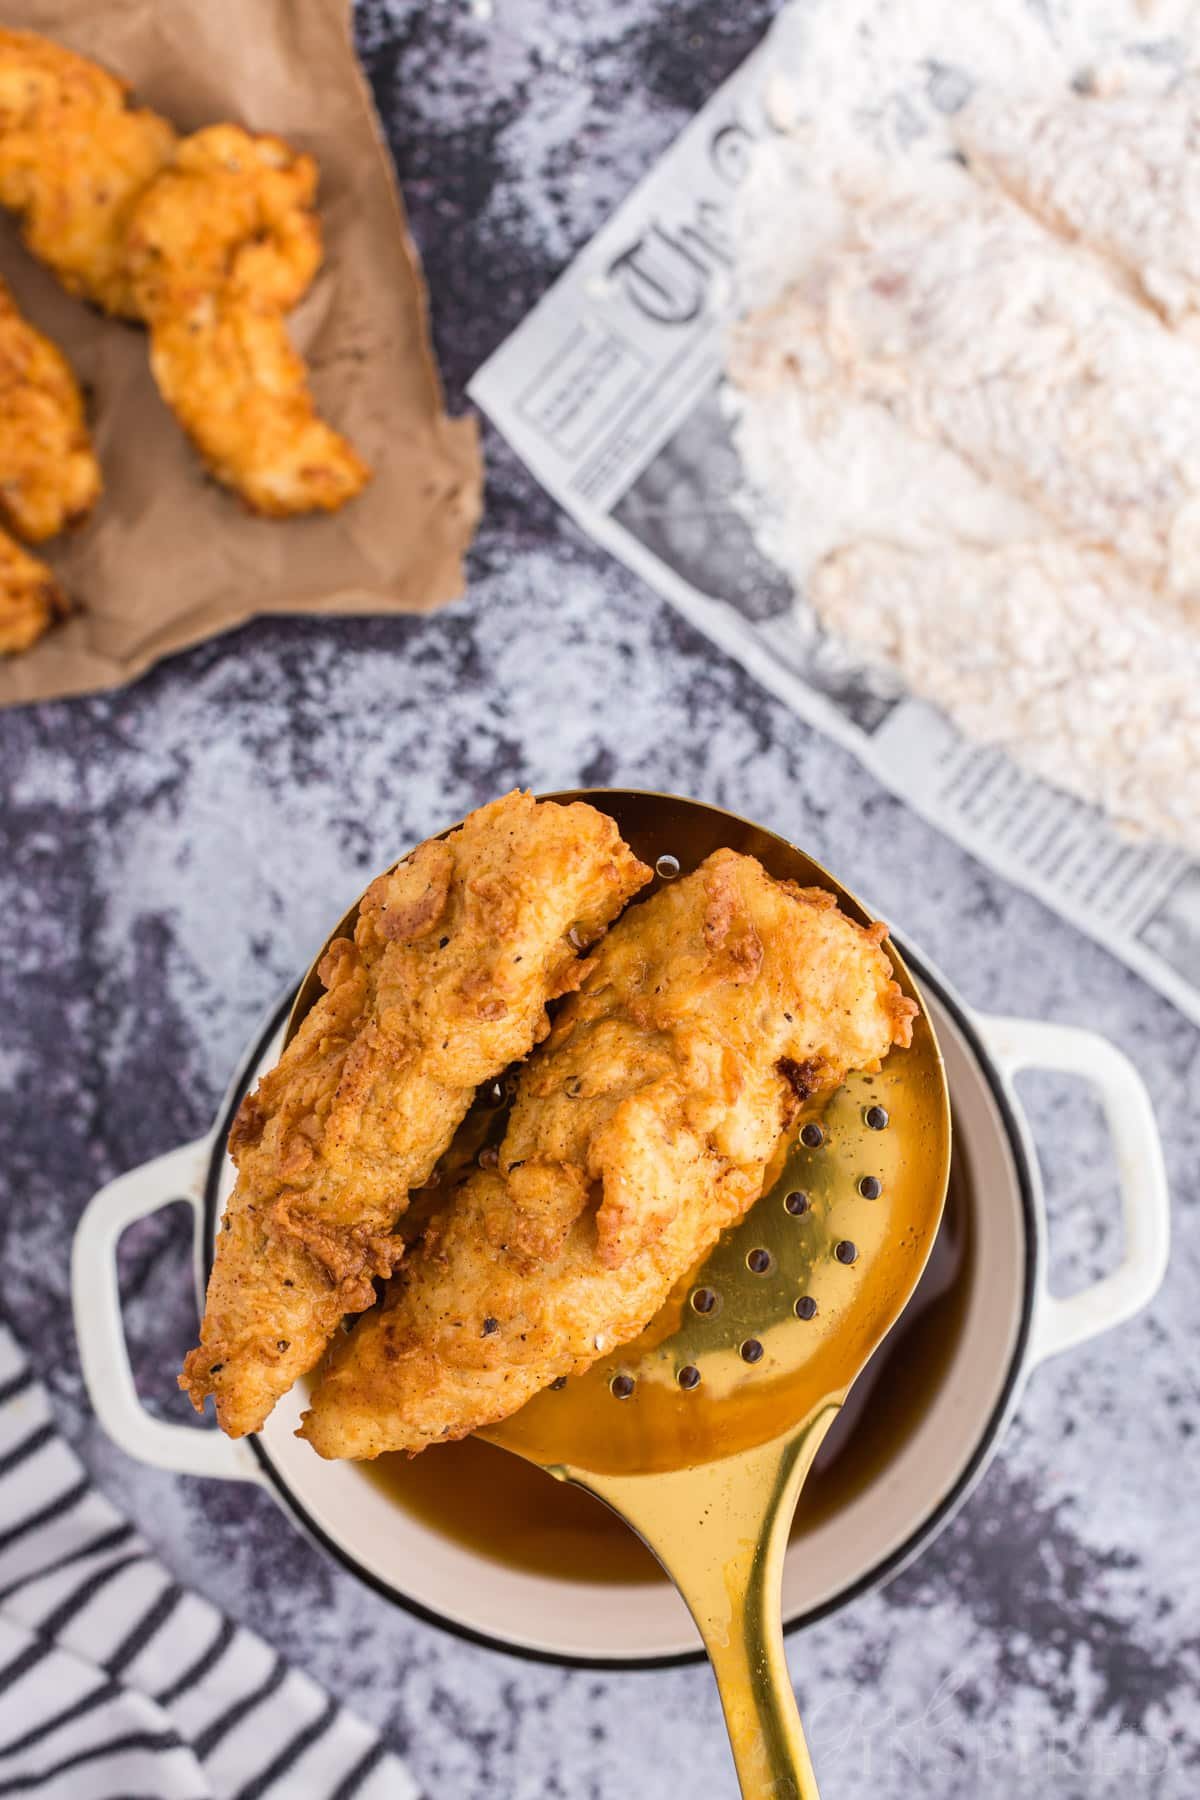 Slotted spoon above Dutch oven with freshly fried buttermilk fried chicken cutlets, parchment paper with freshly fried chicken cutlets, raw chicken cutlets coated with buttermilk and flour mixture on parchment paper.